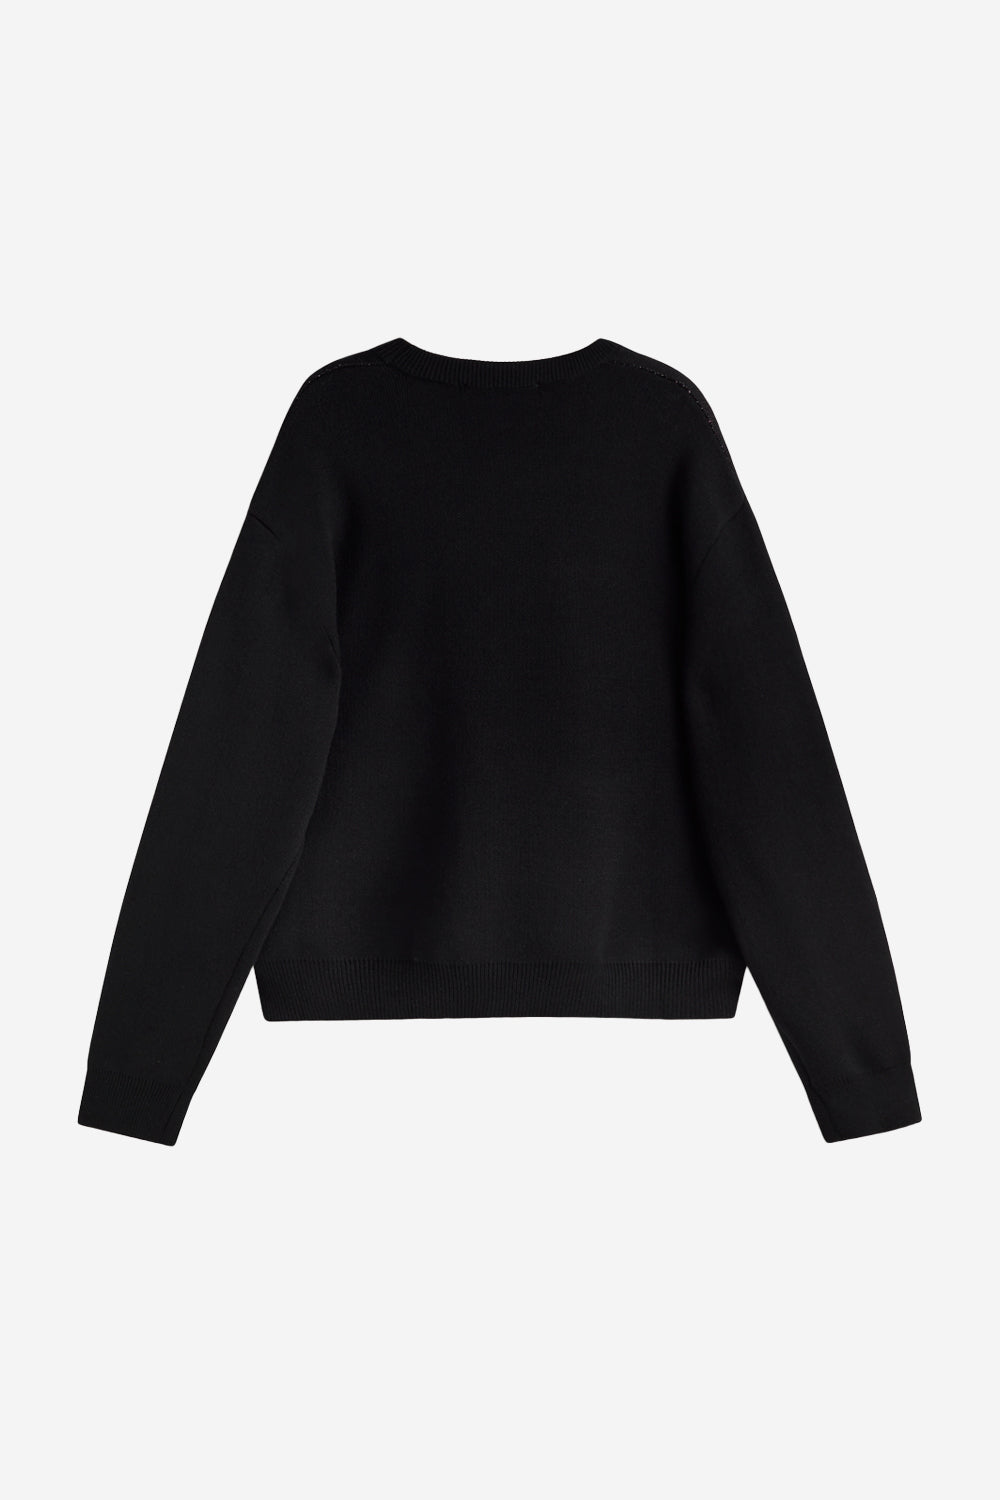 KNITTED SWEATER BLACK